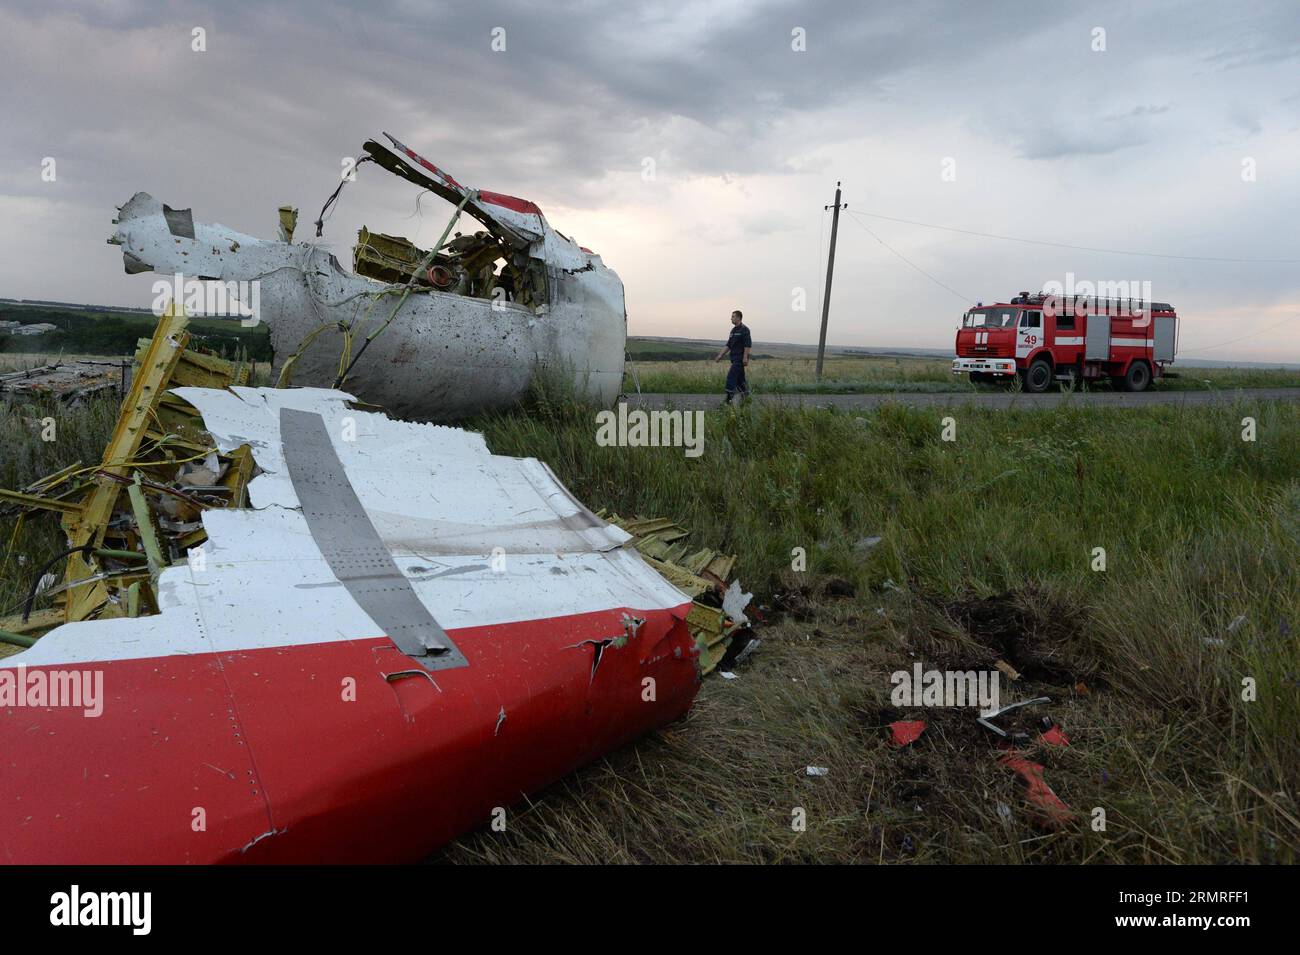 MOSCOW, July 17, 2014 (Xinhua) -- Photo taken on July 17, 2014 shows the debris at the crash site of a passenger plane near the village of Grabovo, Ukraine. A Malaysian flight crashed Thursday in eastern Ukraine near the Russian border, with all the 280 passengers and 15 crew members on board reportedly having been killed. (Xinhua/RIA Novosti) UKRAINE-PLANE-CRASH PUBLICATIONxNOTxINxCHN   Moscow July 17 2014 XINHUA Photo Taken ON July 17 2014 Shows The debris AT The Crash Site of a Passenger Plane Near The Village of  Ukraine a Malaysian Flight Crashed Thursday in Eastern Ukraine Near The Russi Stock Photo